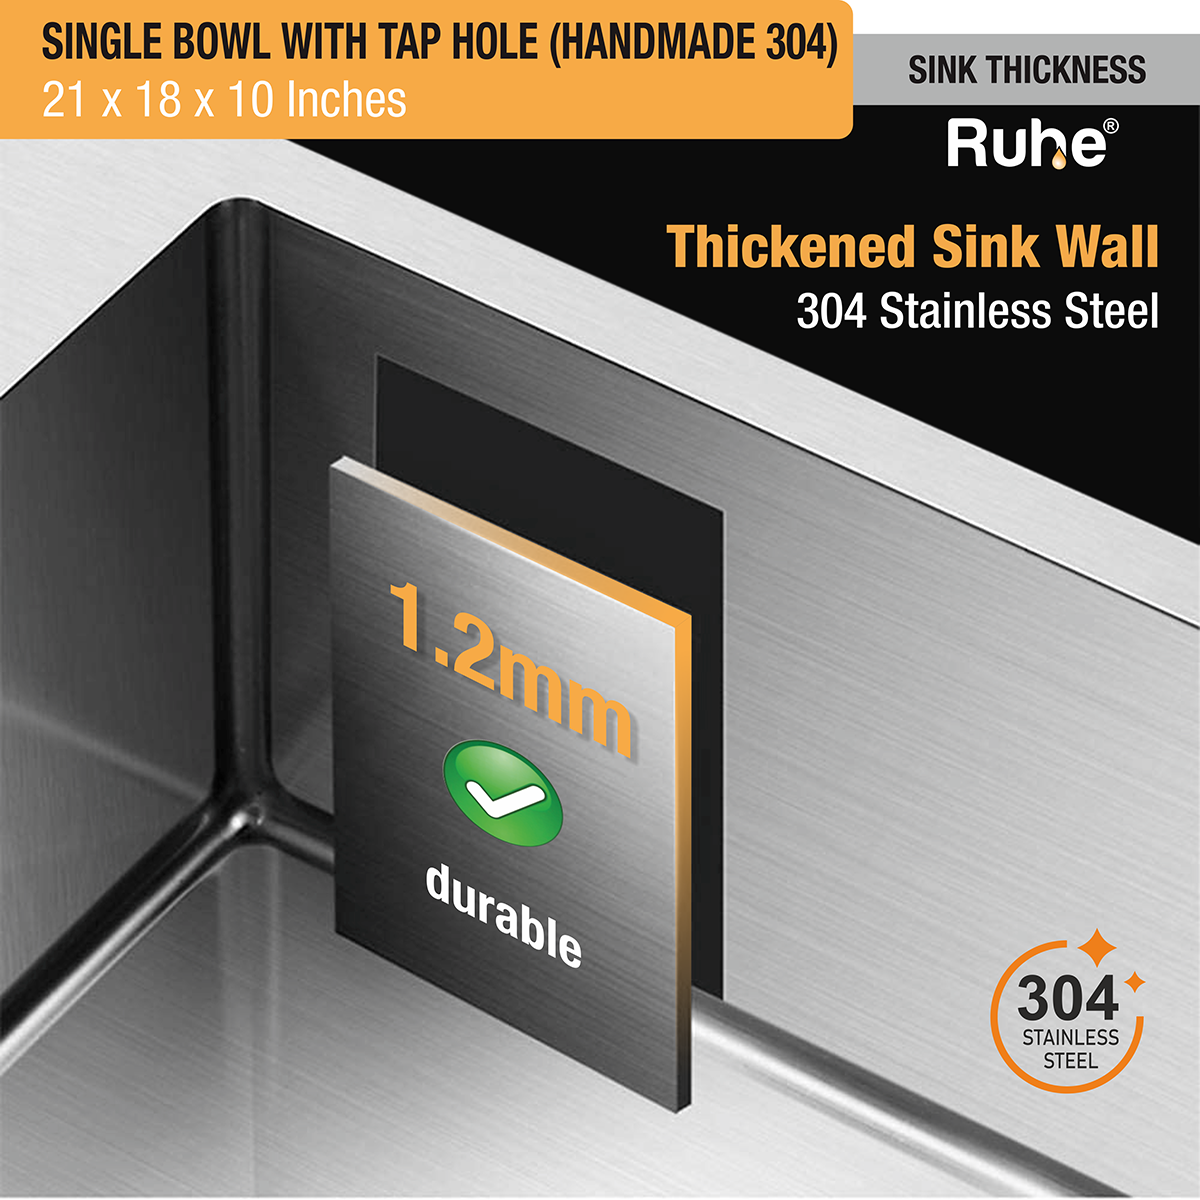 Handmade Single Bowl 304-Grade Kitchen Sink (21 x 18 x 10 Inches) with Tap Hole stainless steel thickness